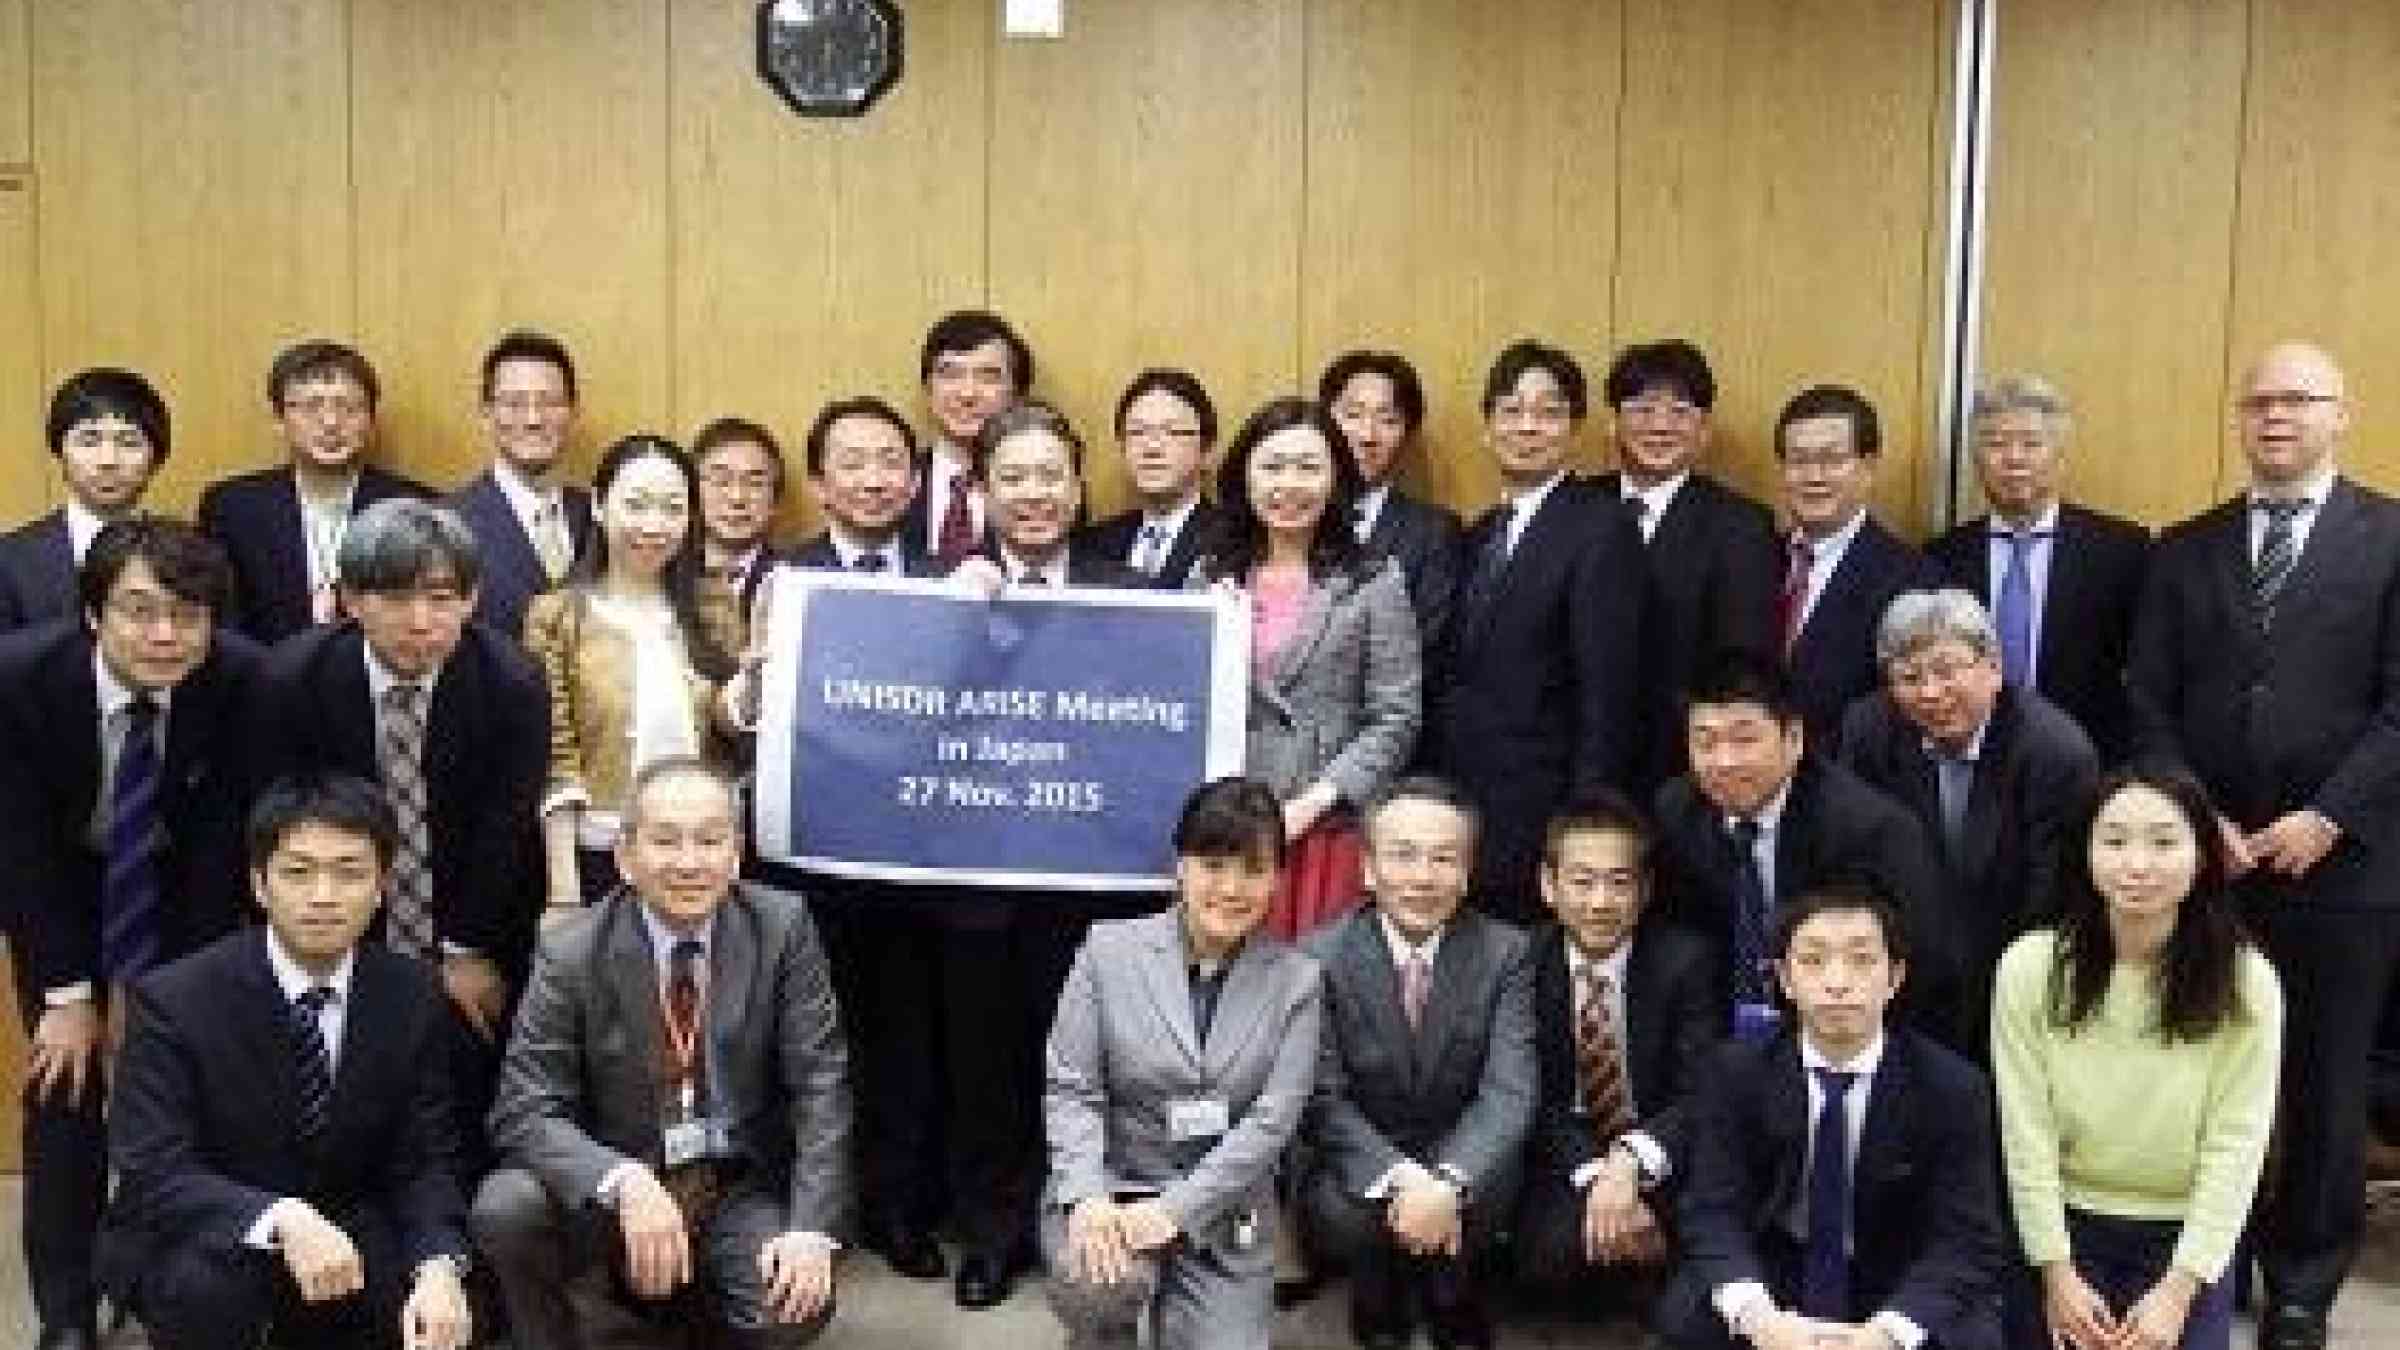 Members of the new ARISE network in Japan (Photo: UNISDR)